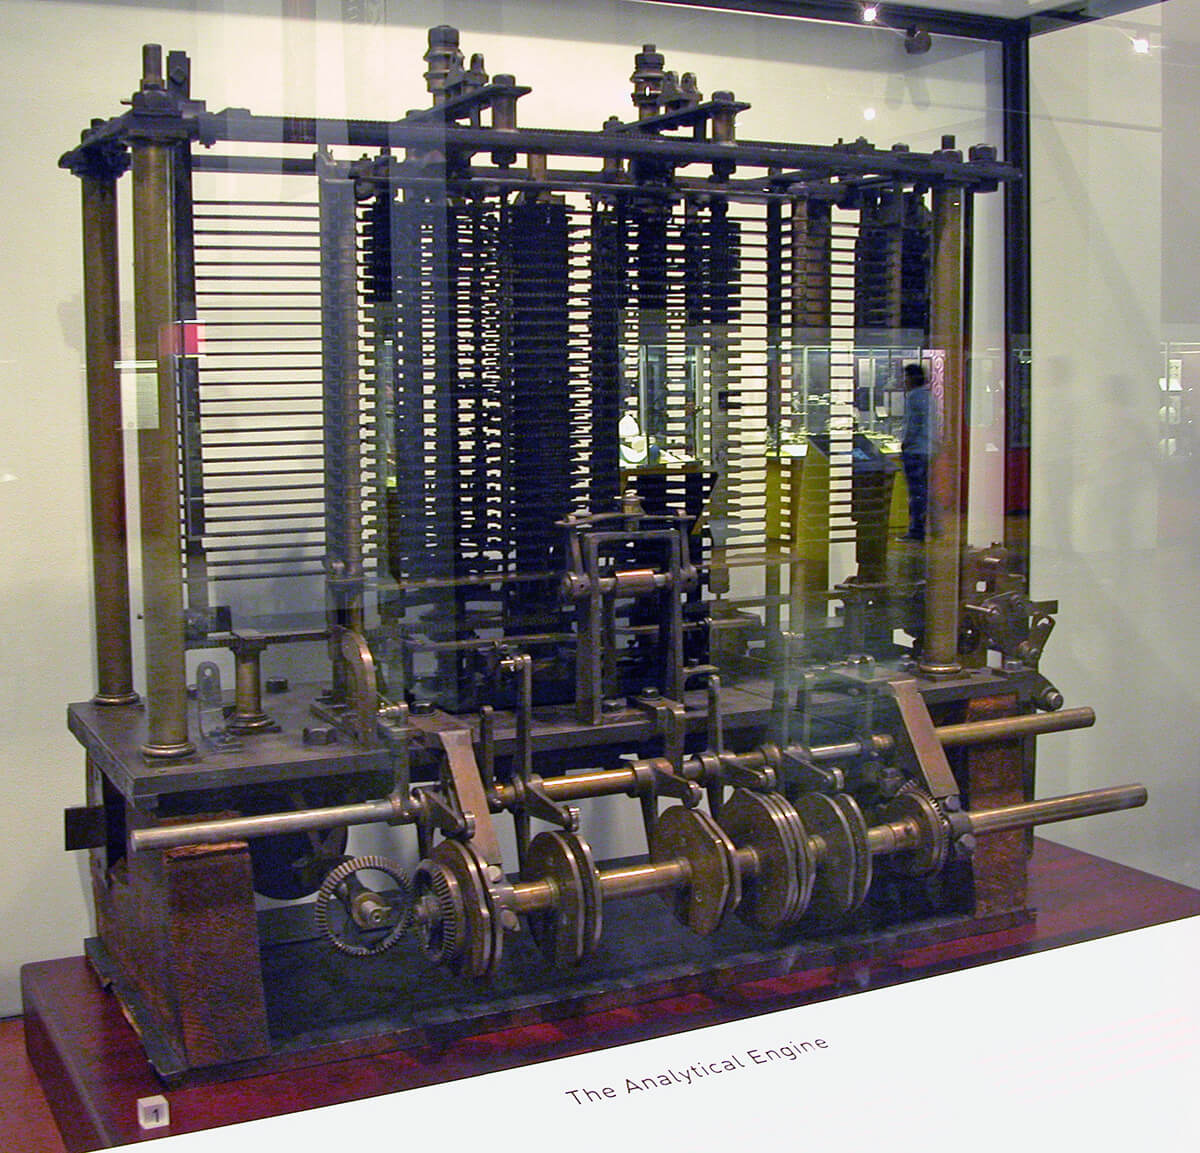 Reconstruction of Babbage's Analytical Engine, the first general-purpose programmable computer (image courtesy www.wikipedia.com)